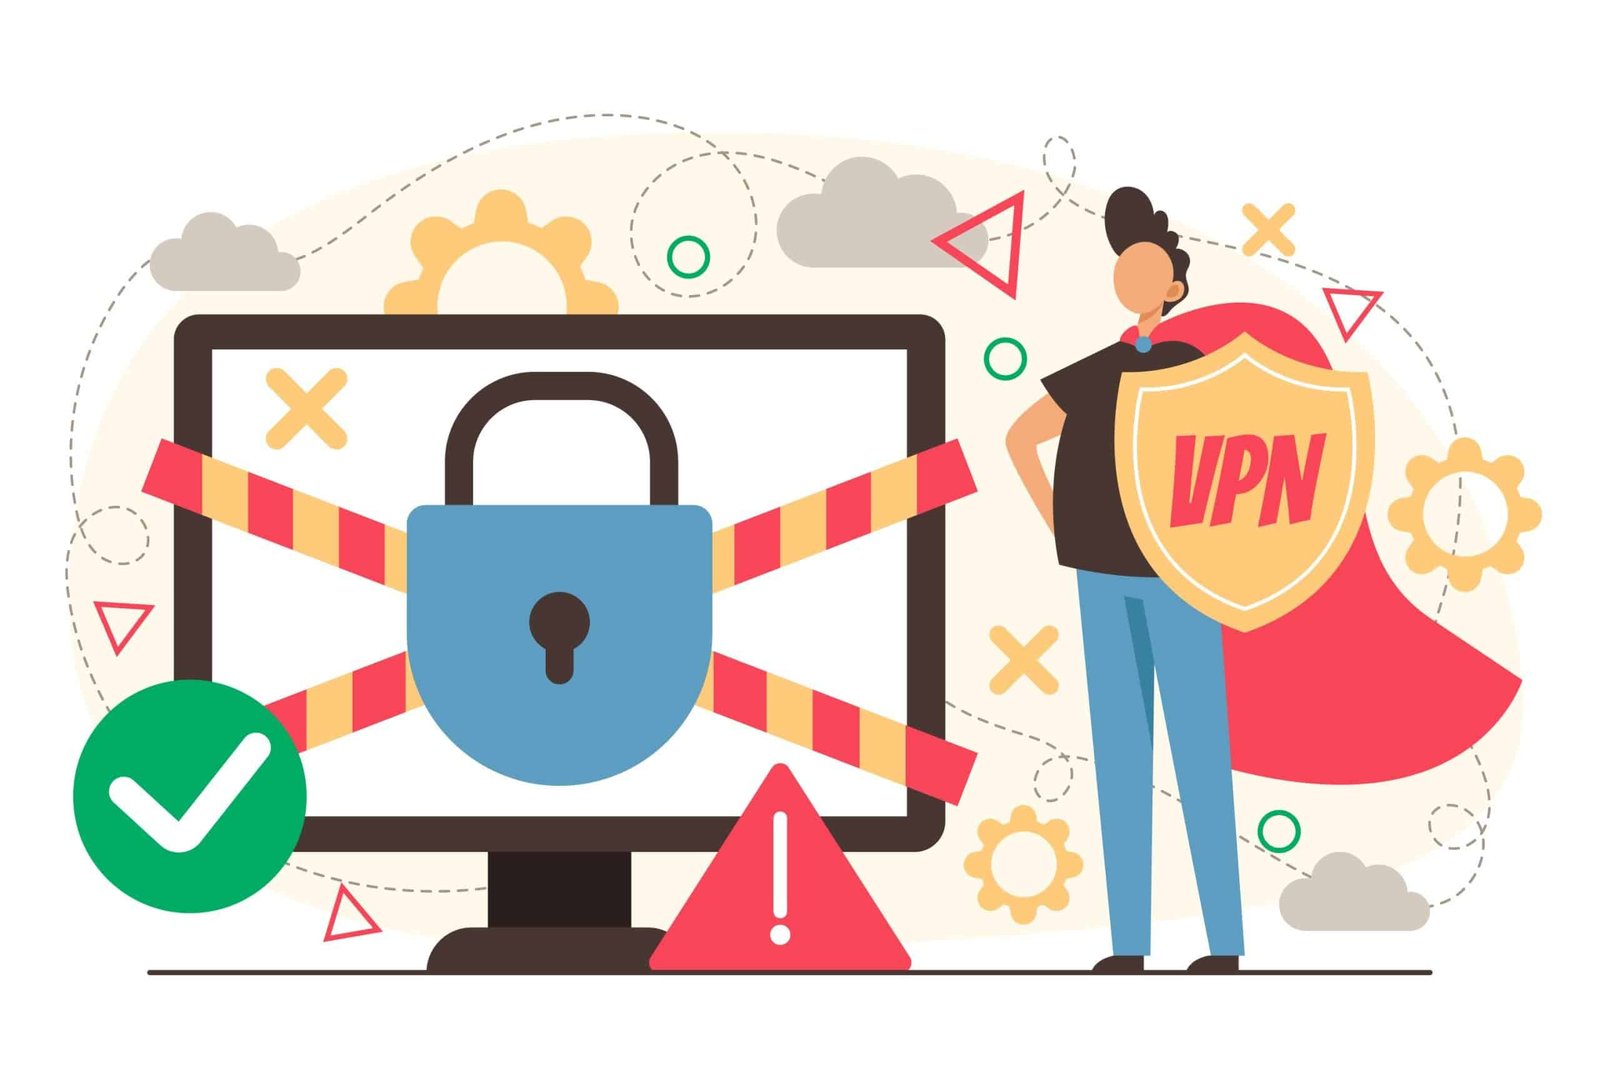 VPNs: Do You Really Need One